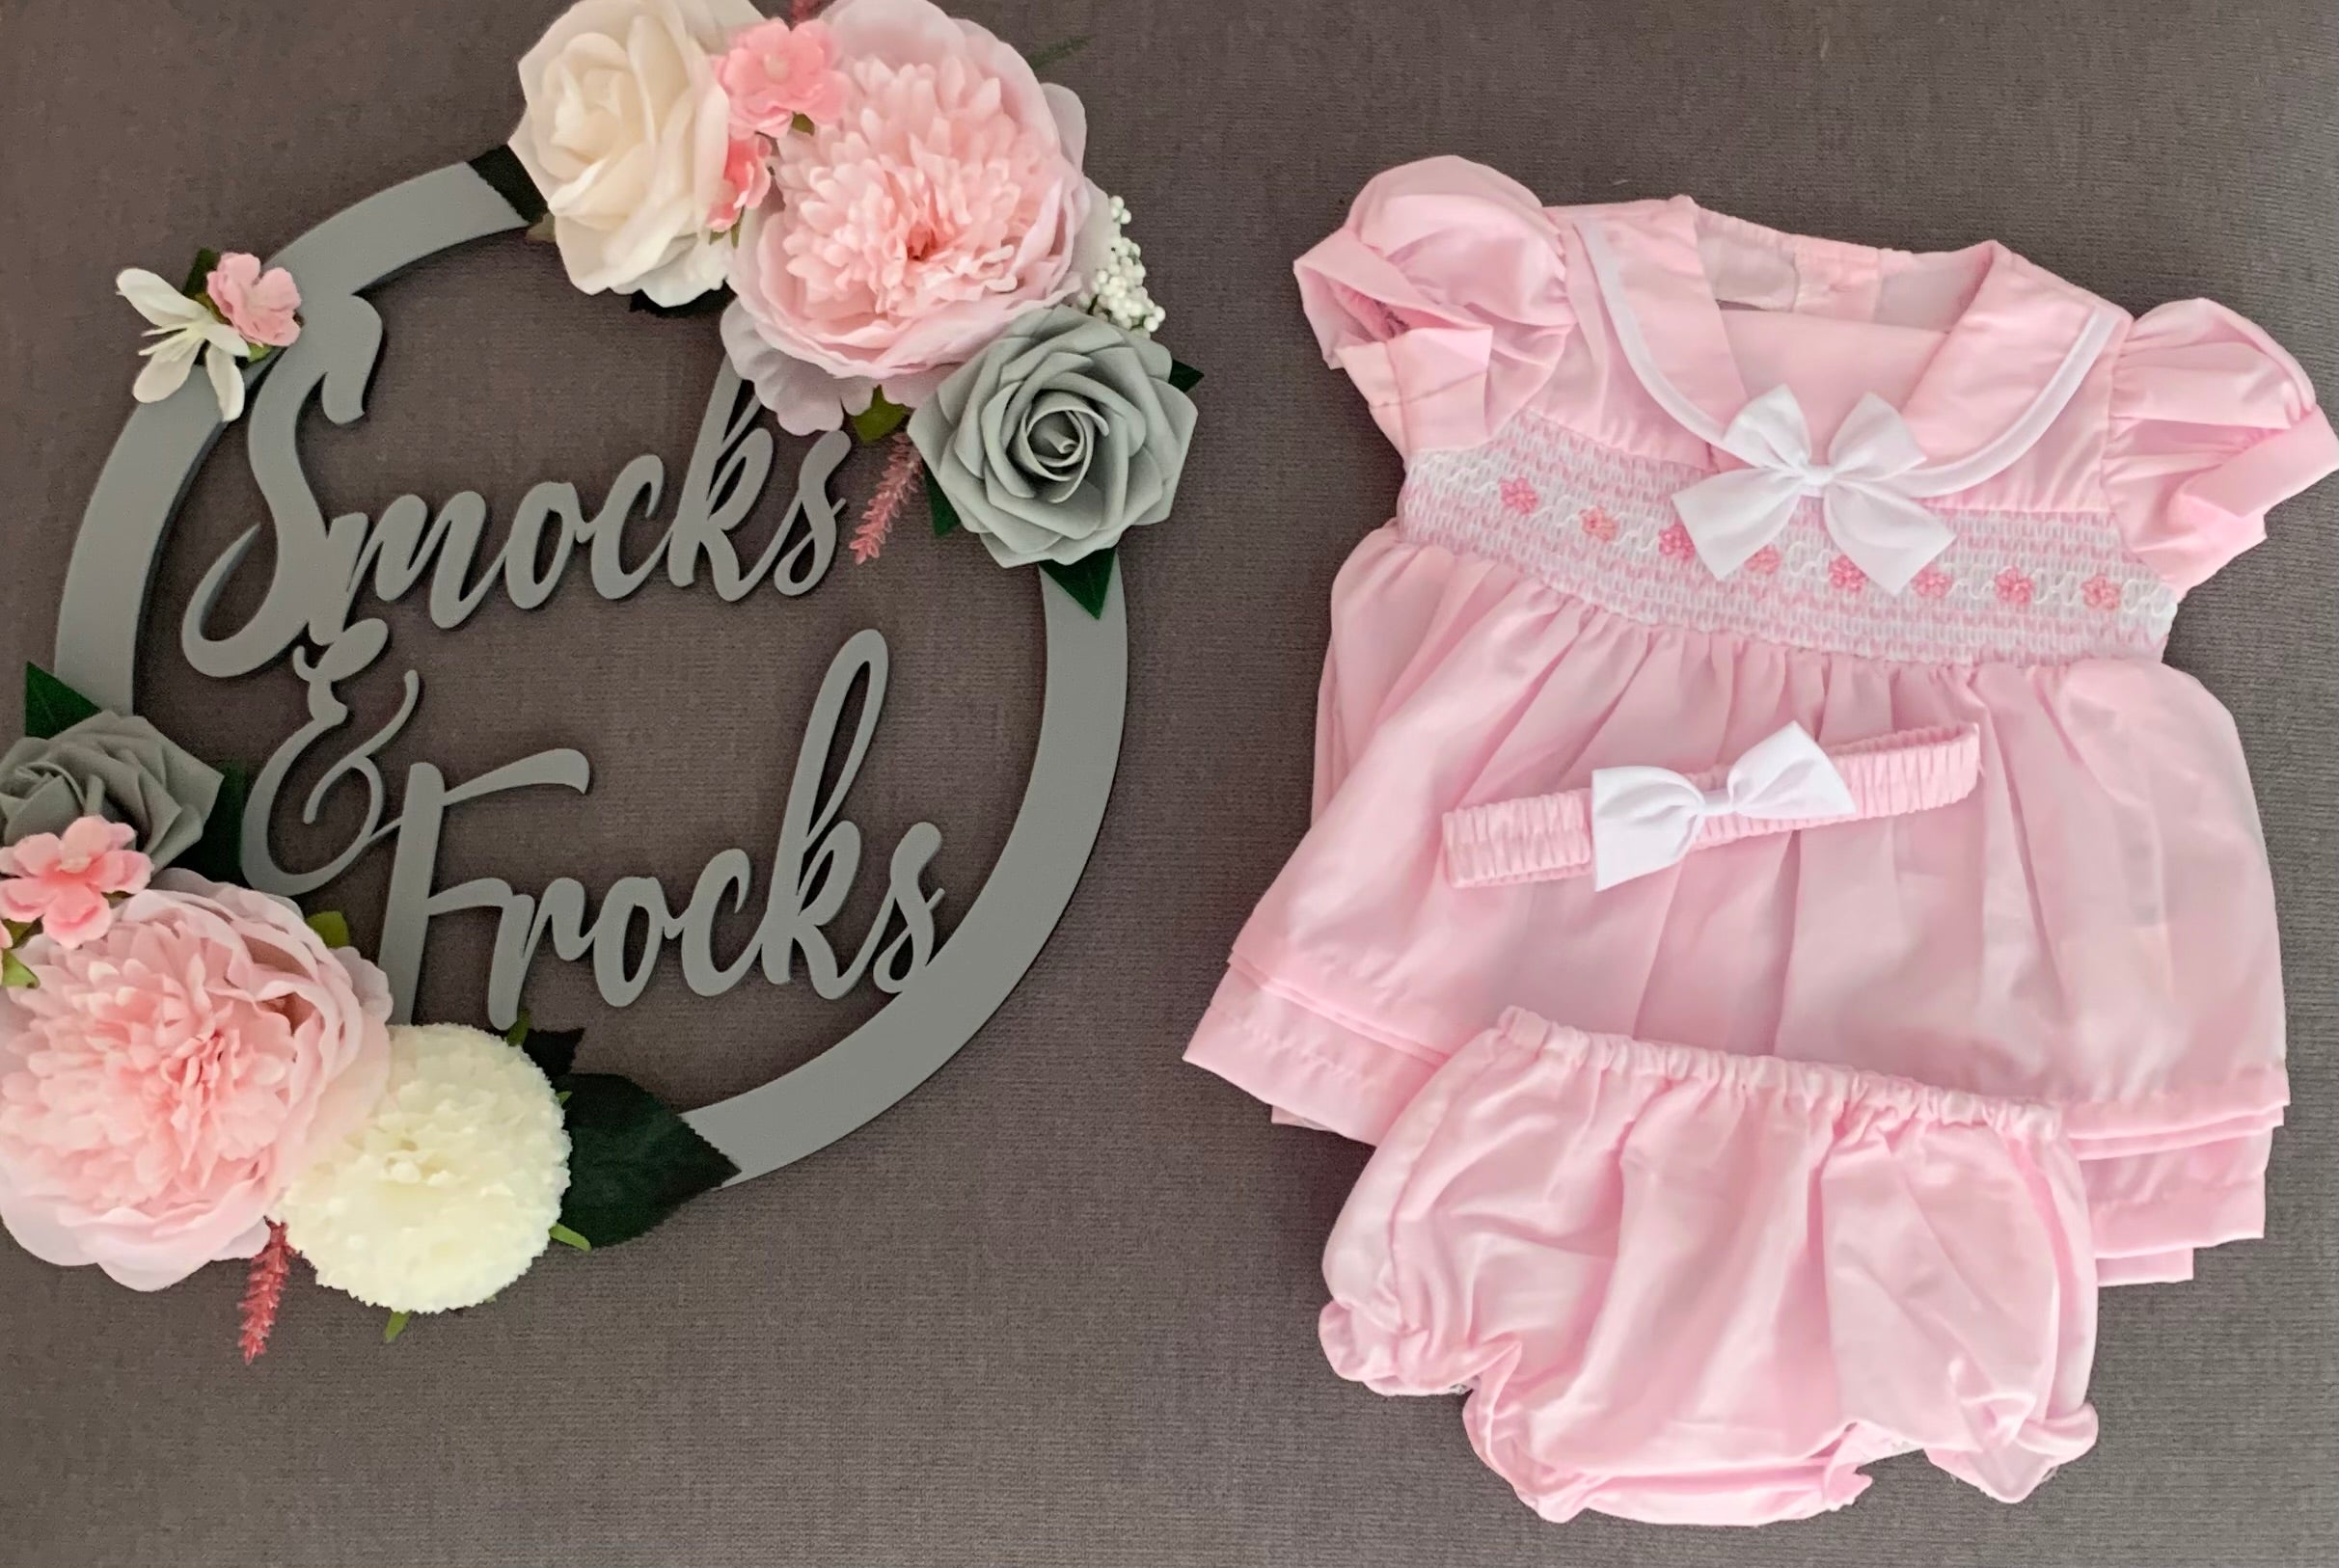 Rock-A-Bye - Smocked Dress with Bow Detail and Matching Headband - D06364B